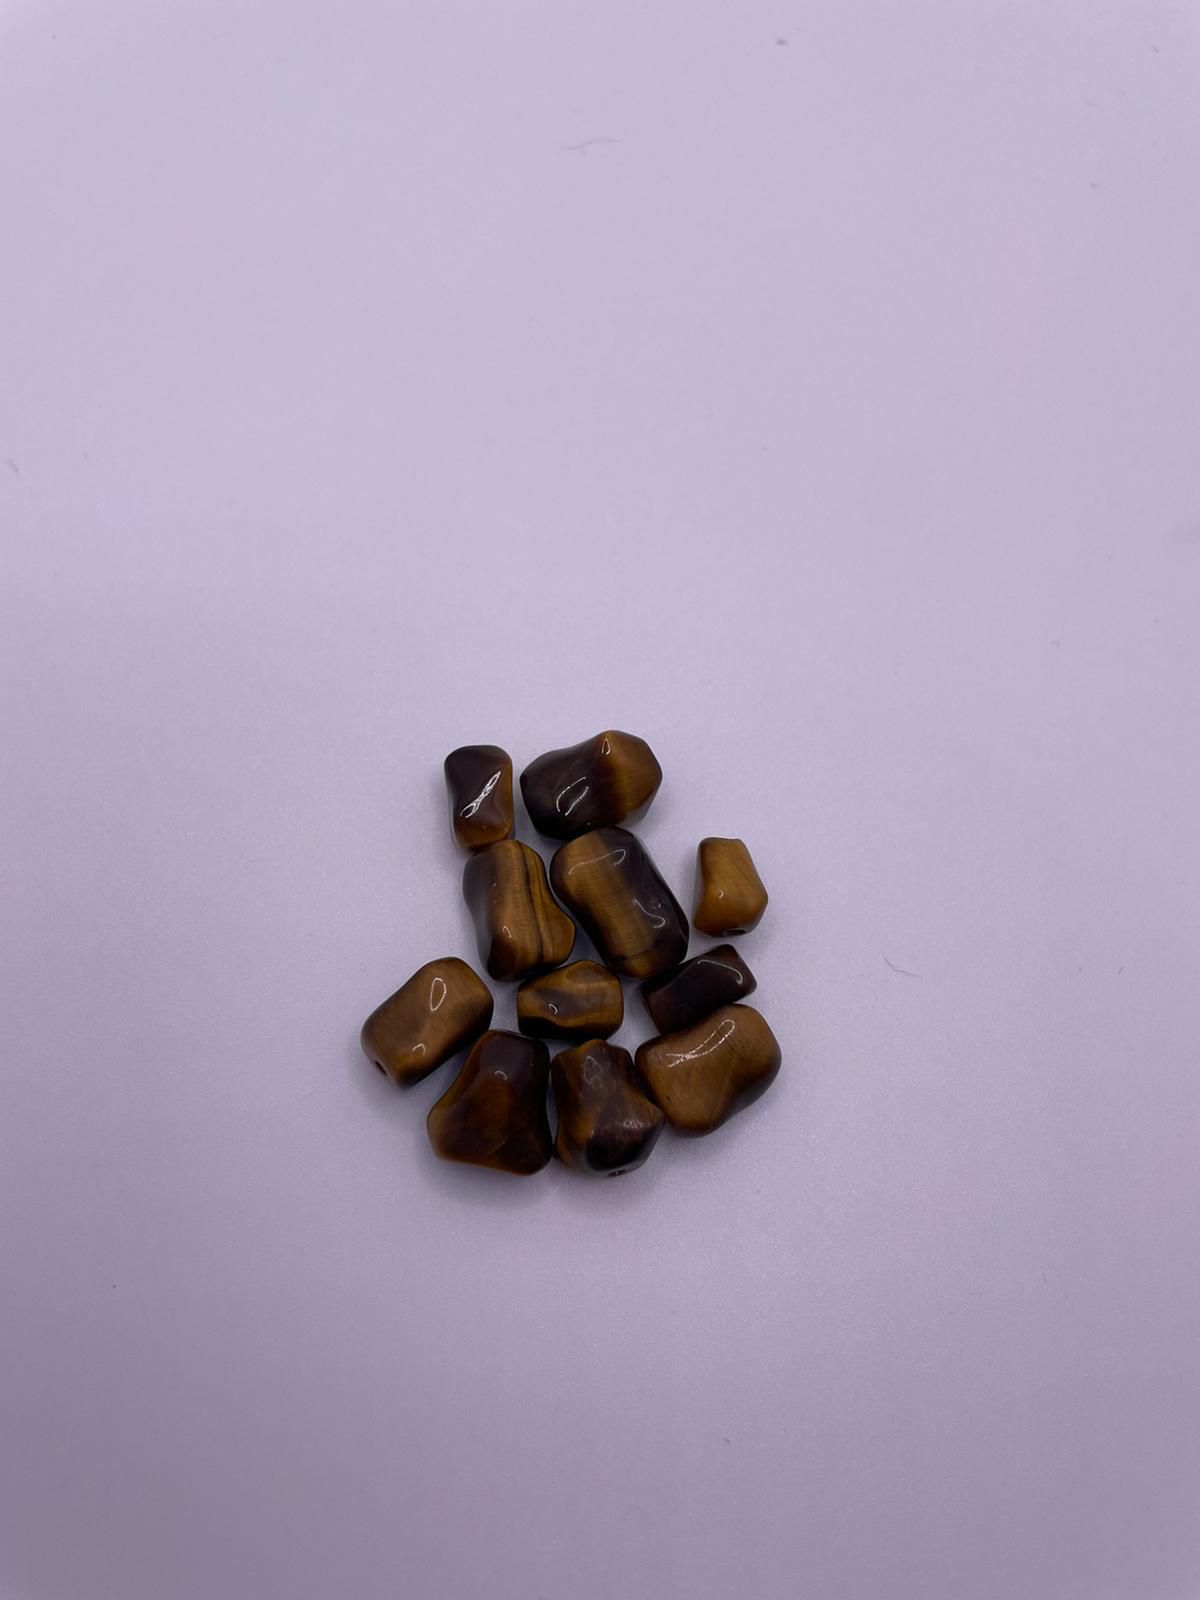 Assorted tigers eye loose stones - Image 2 of 2